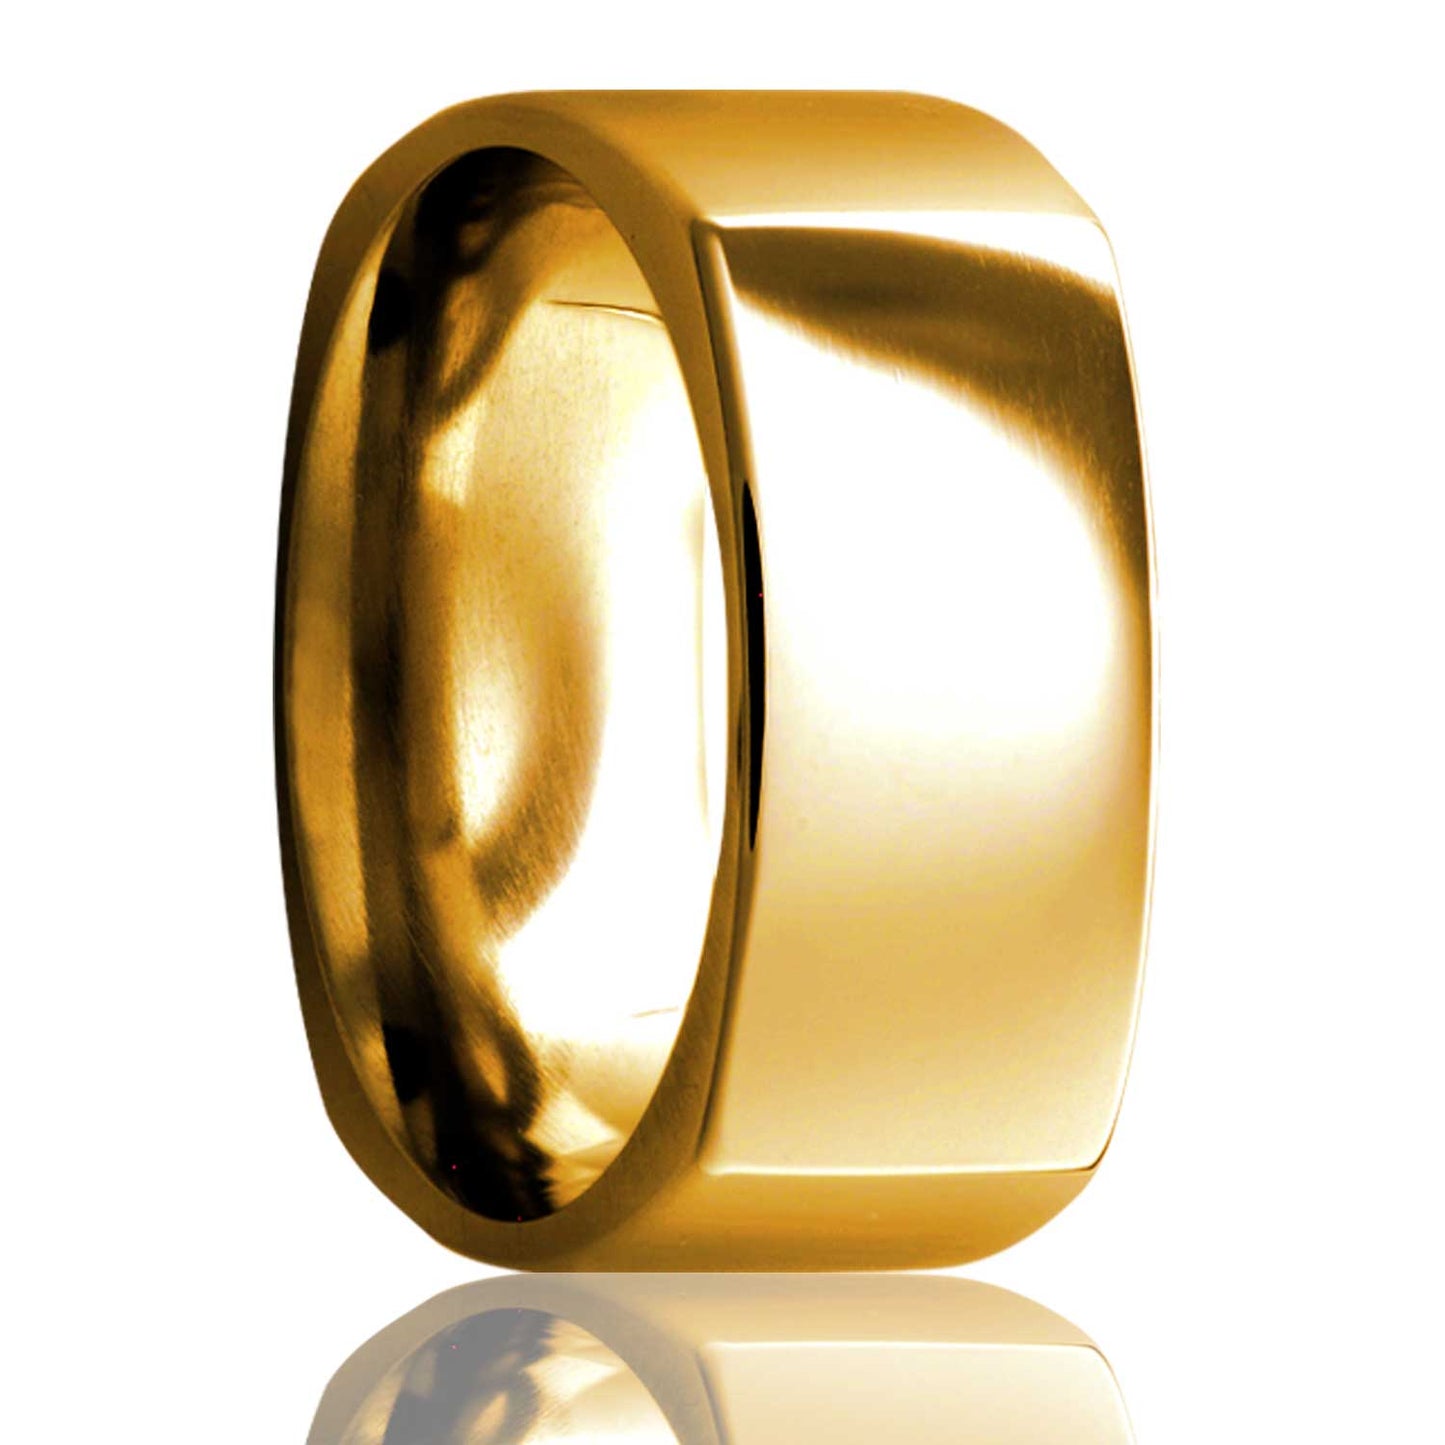 A 14k gold square shaped wedding band displayed on a neutral white background.